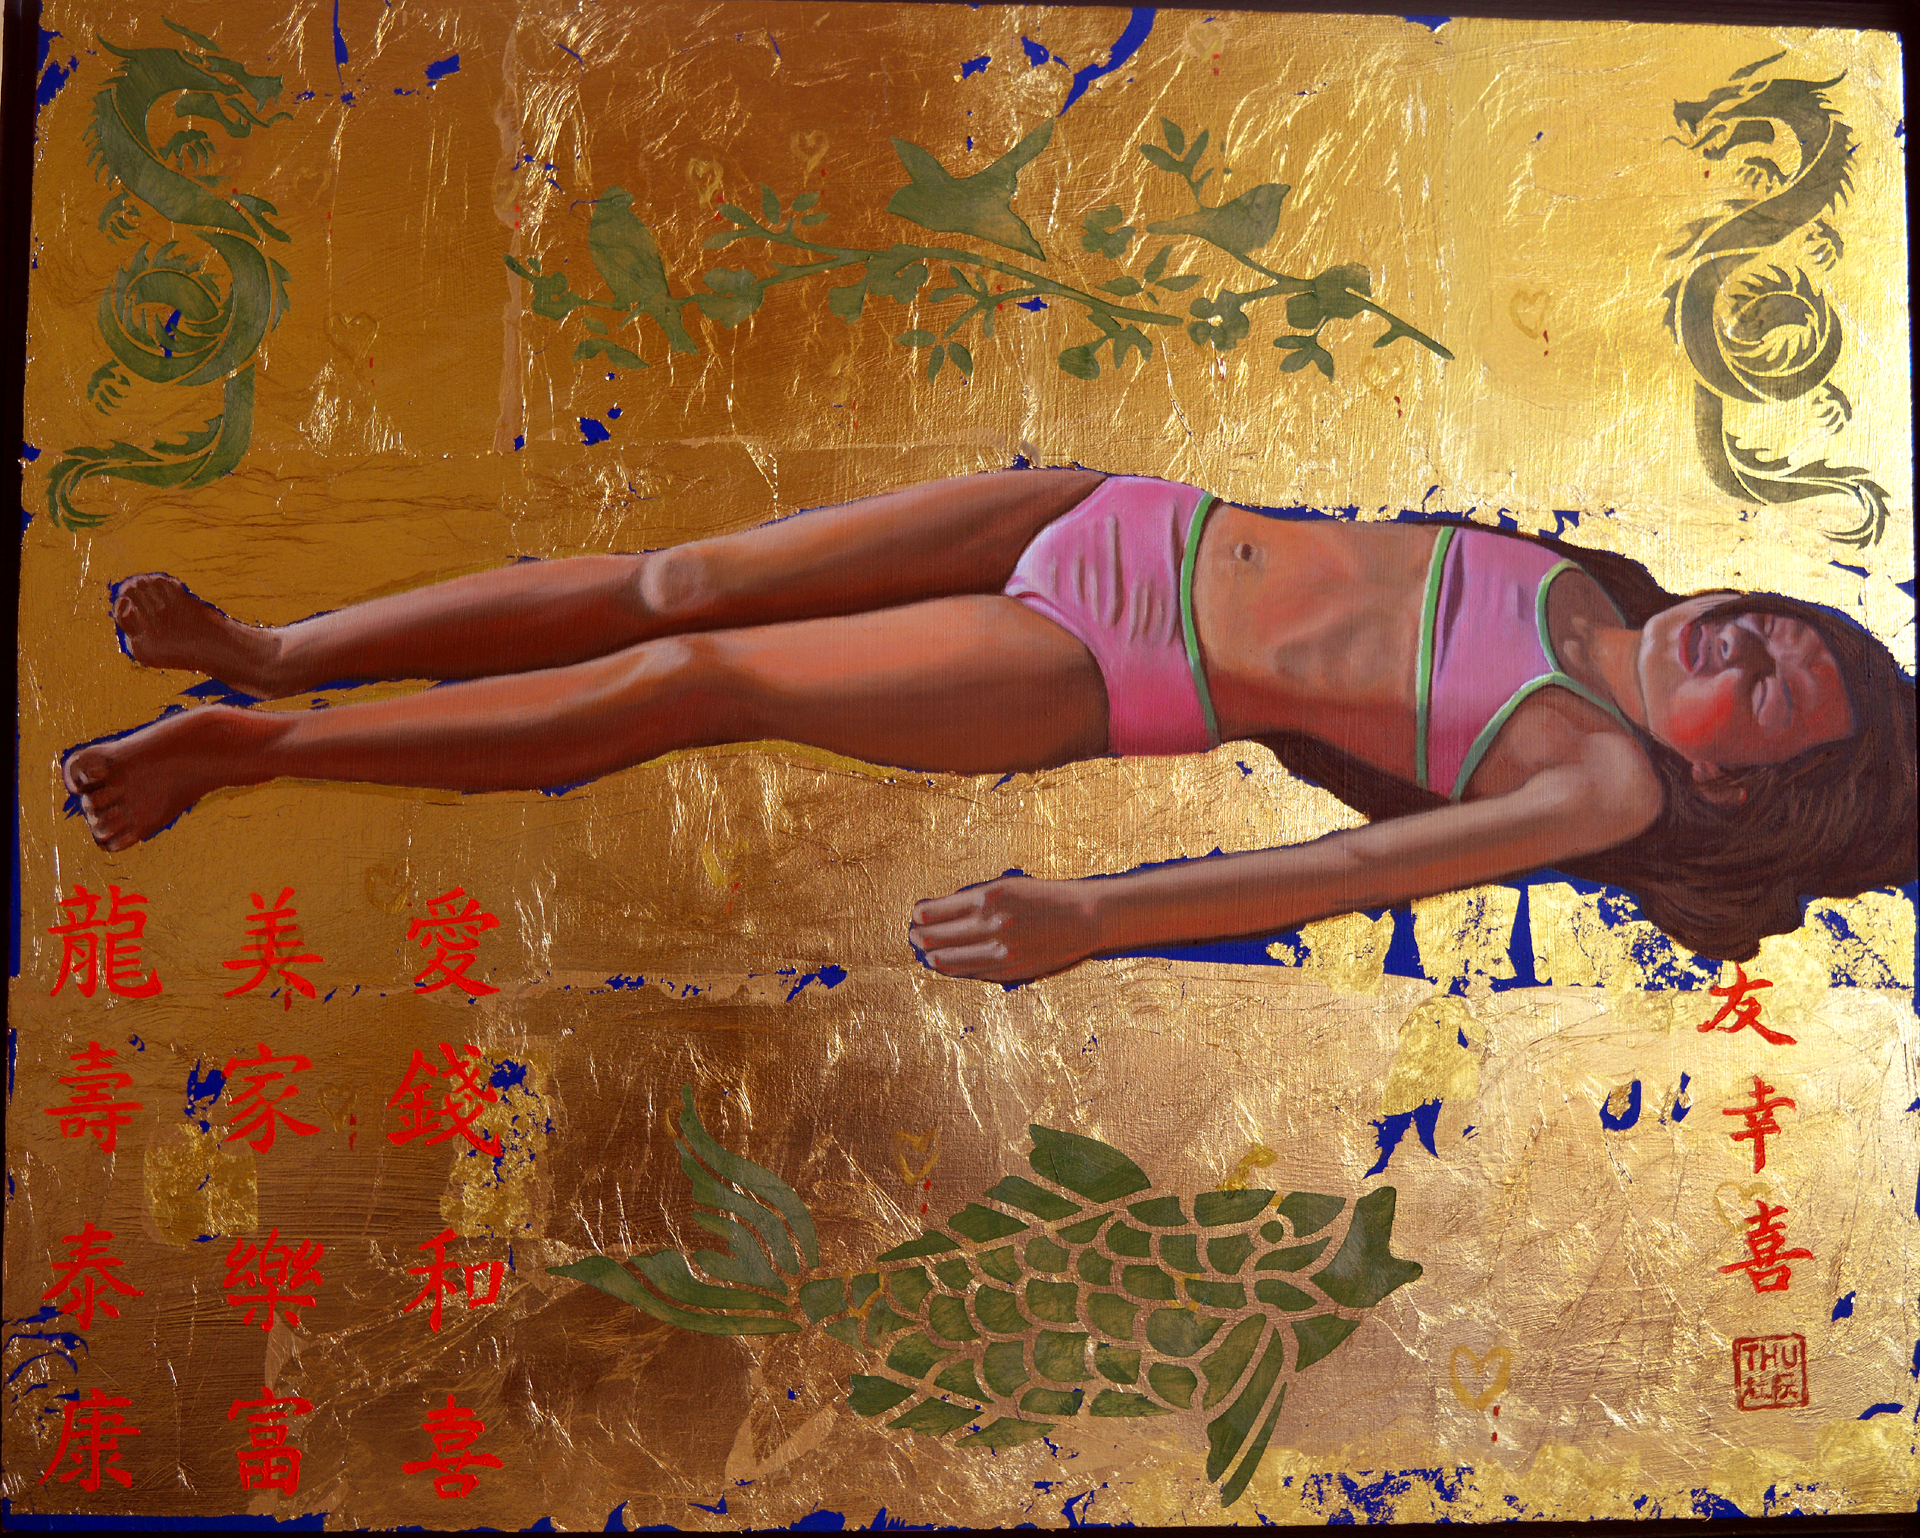 Thu Nguyen; The Fallen Barbie, 2019, Original Painting Oil, 20 x 16 inches. Artwork description: 241  The Fallen Barbie , oil and gold leaf on panel, image size 16 x 20 inches, framedThis painting portrays the contrast between the stereotype of a carefree sweet childhood with the reality of a life often filled with anxiety, confusion, broken heart and loneliness. ...